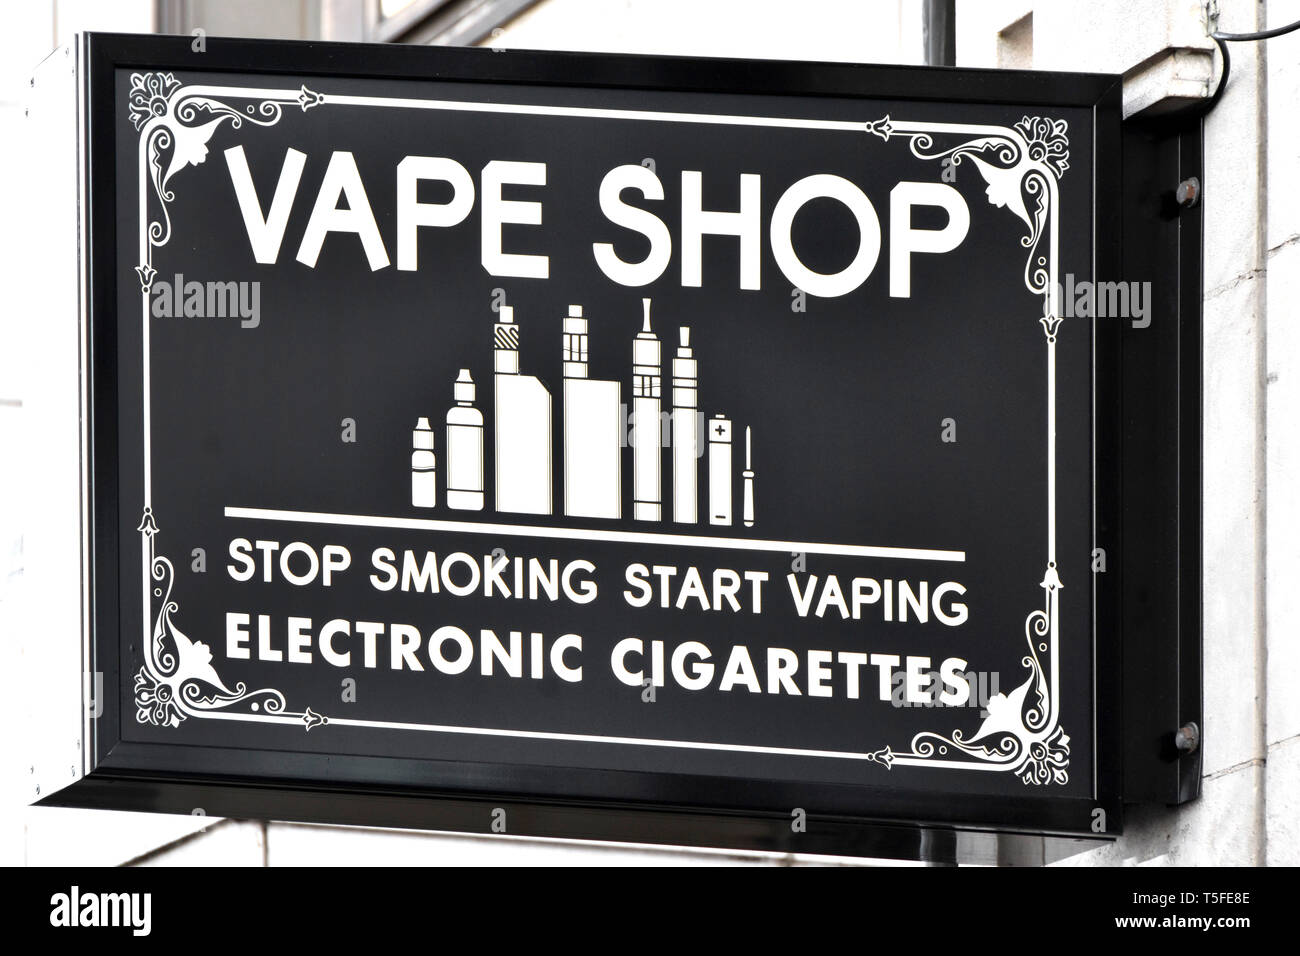 Vape shop sign selling e cigarette or electronic cigarettes as handheld electronic devices with e juice & other smoking accessories London England UK Stock Photo